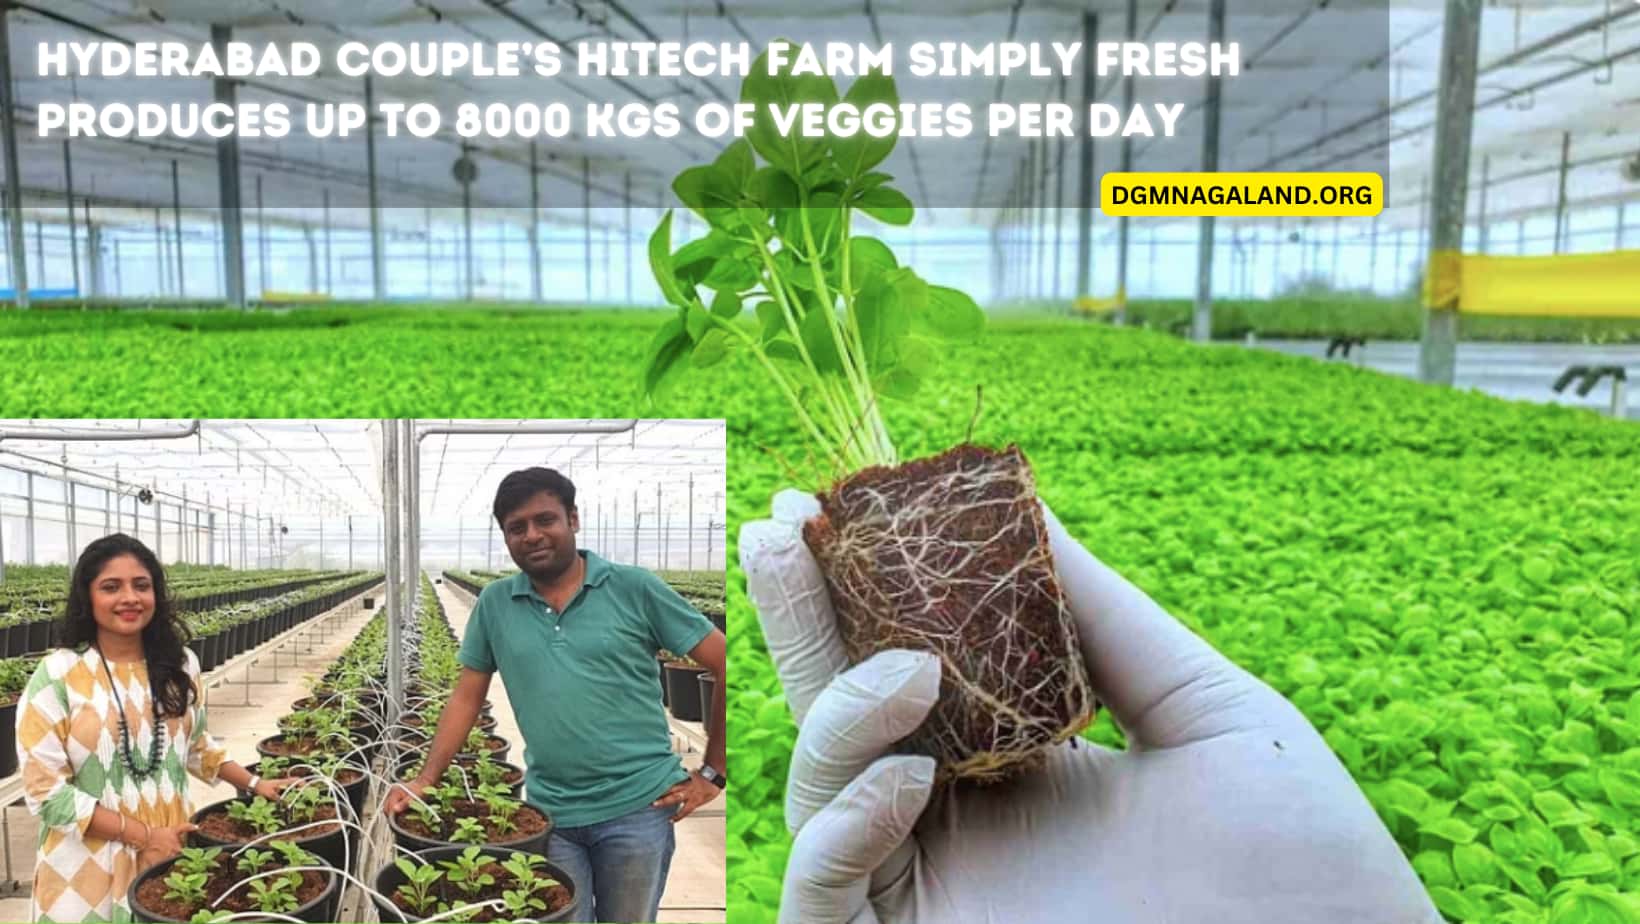 Hyderabad Couple's HiTech Farm Simply Fresh Produces Up to 8000 Kgs of Veggies per Day